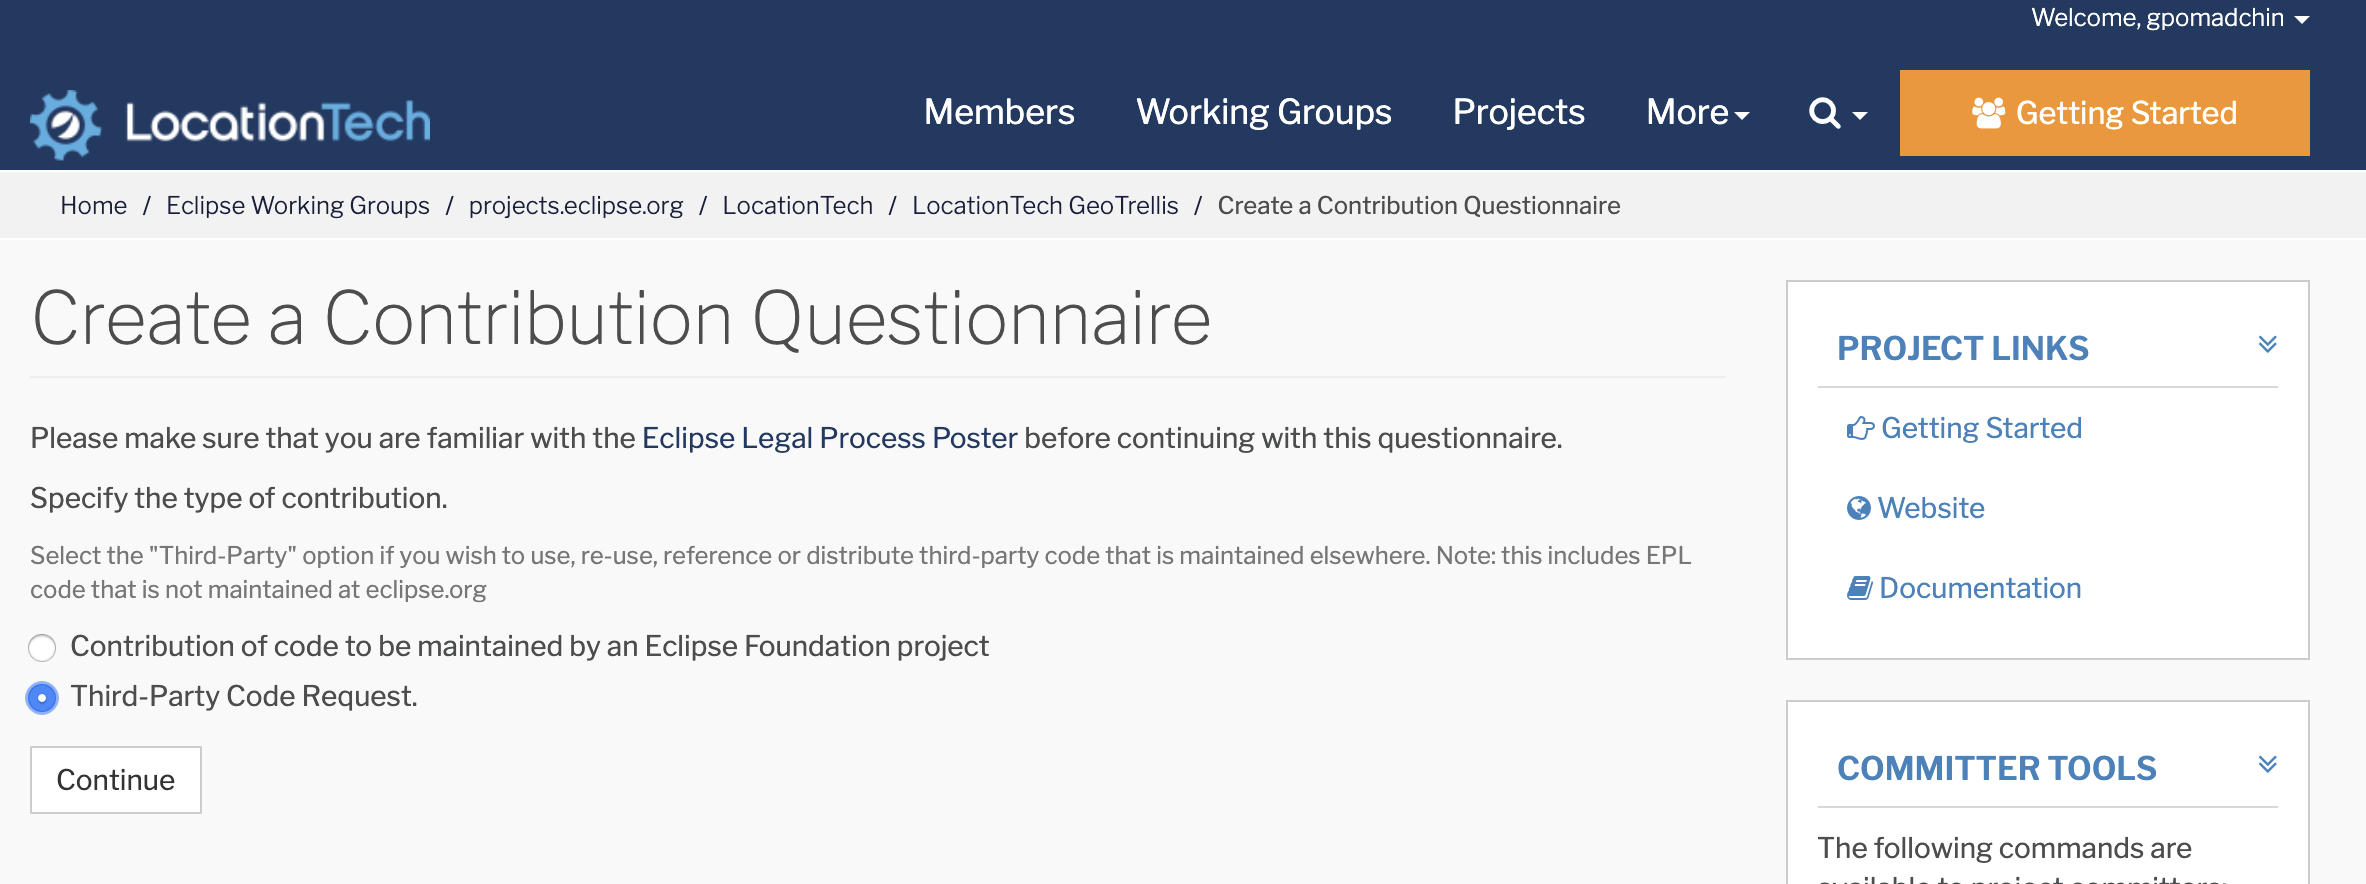 Create a Contribution Questionnaire page